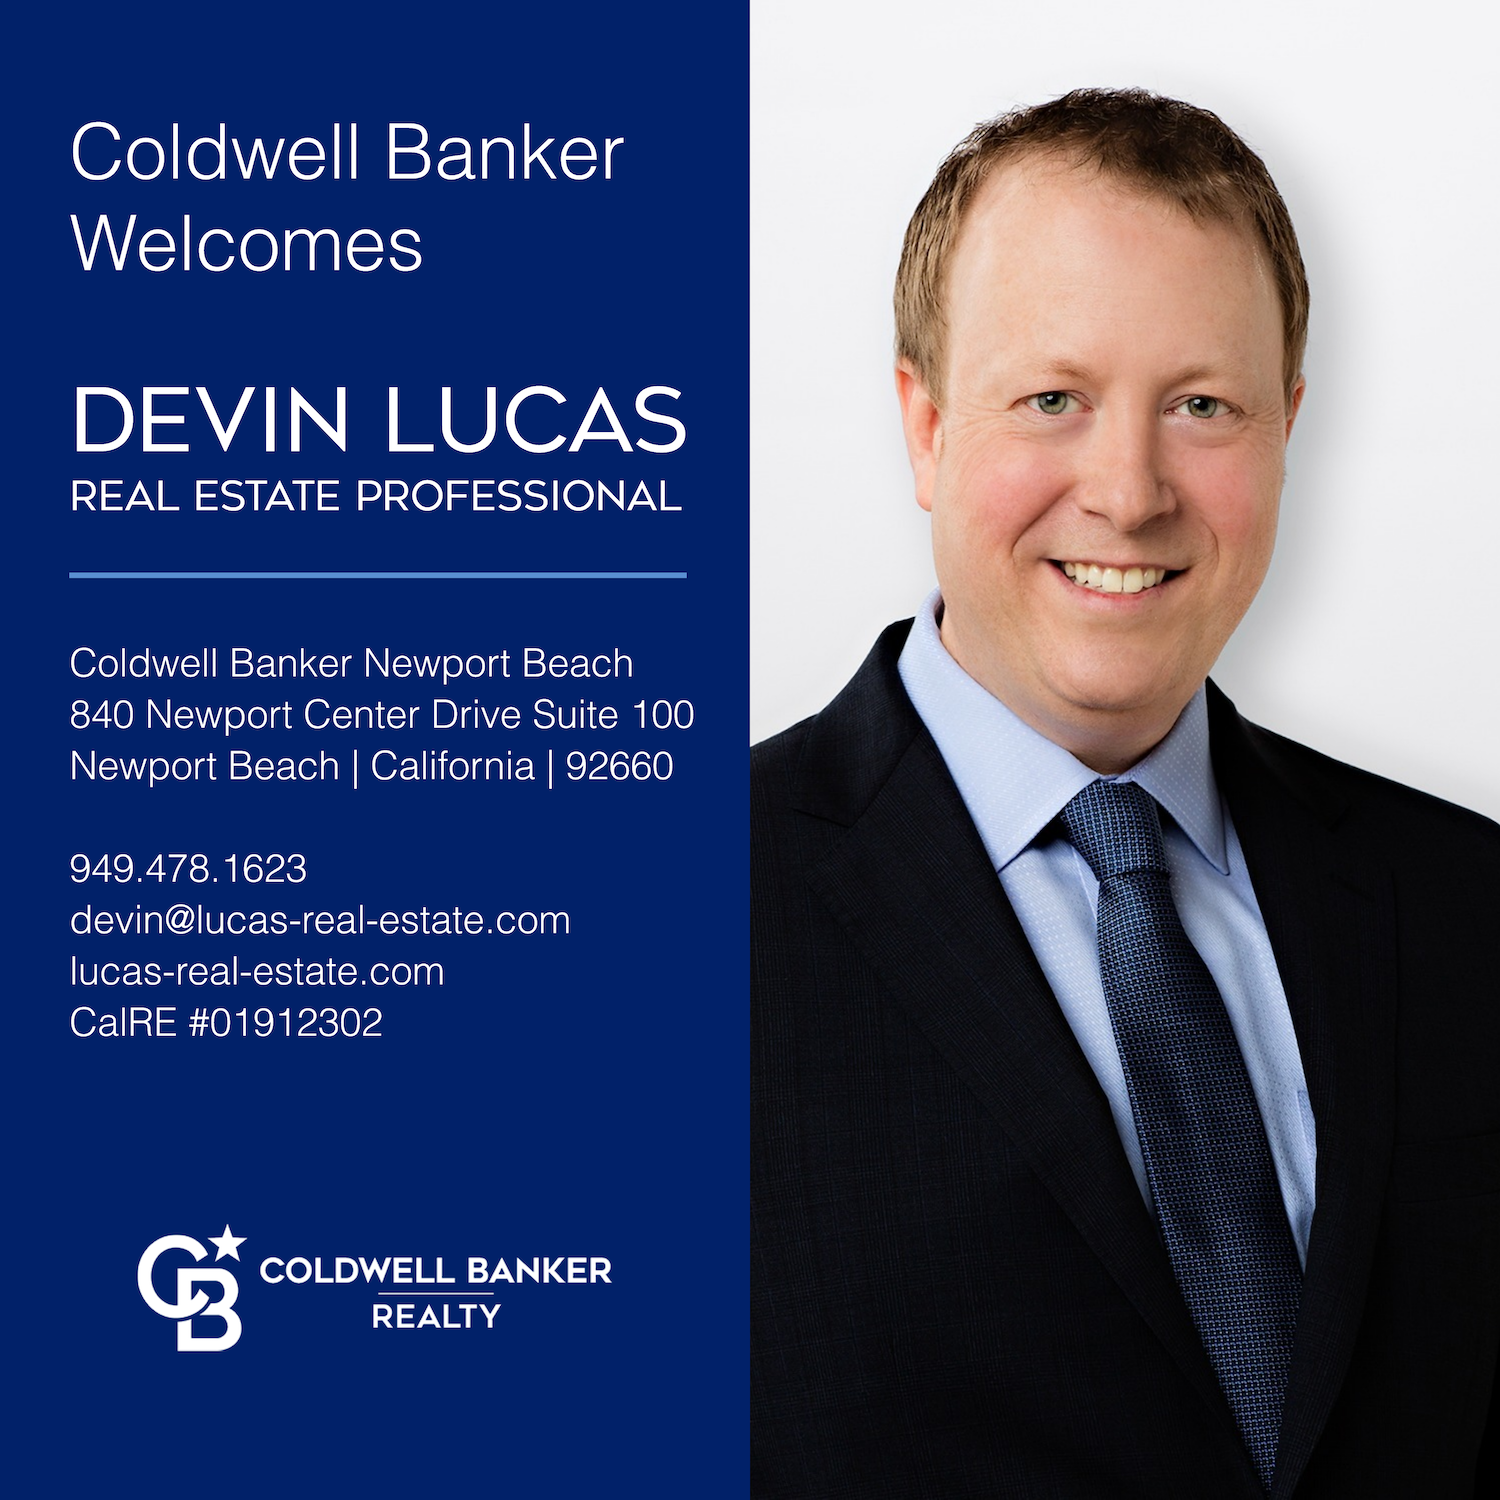 Coldwell Banker Welcomes Devin Lucas